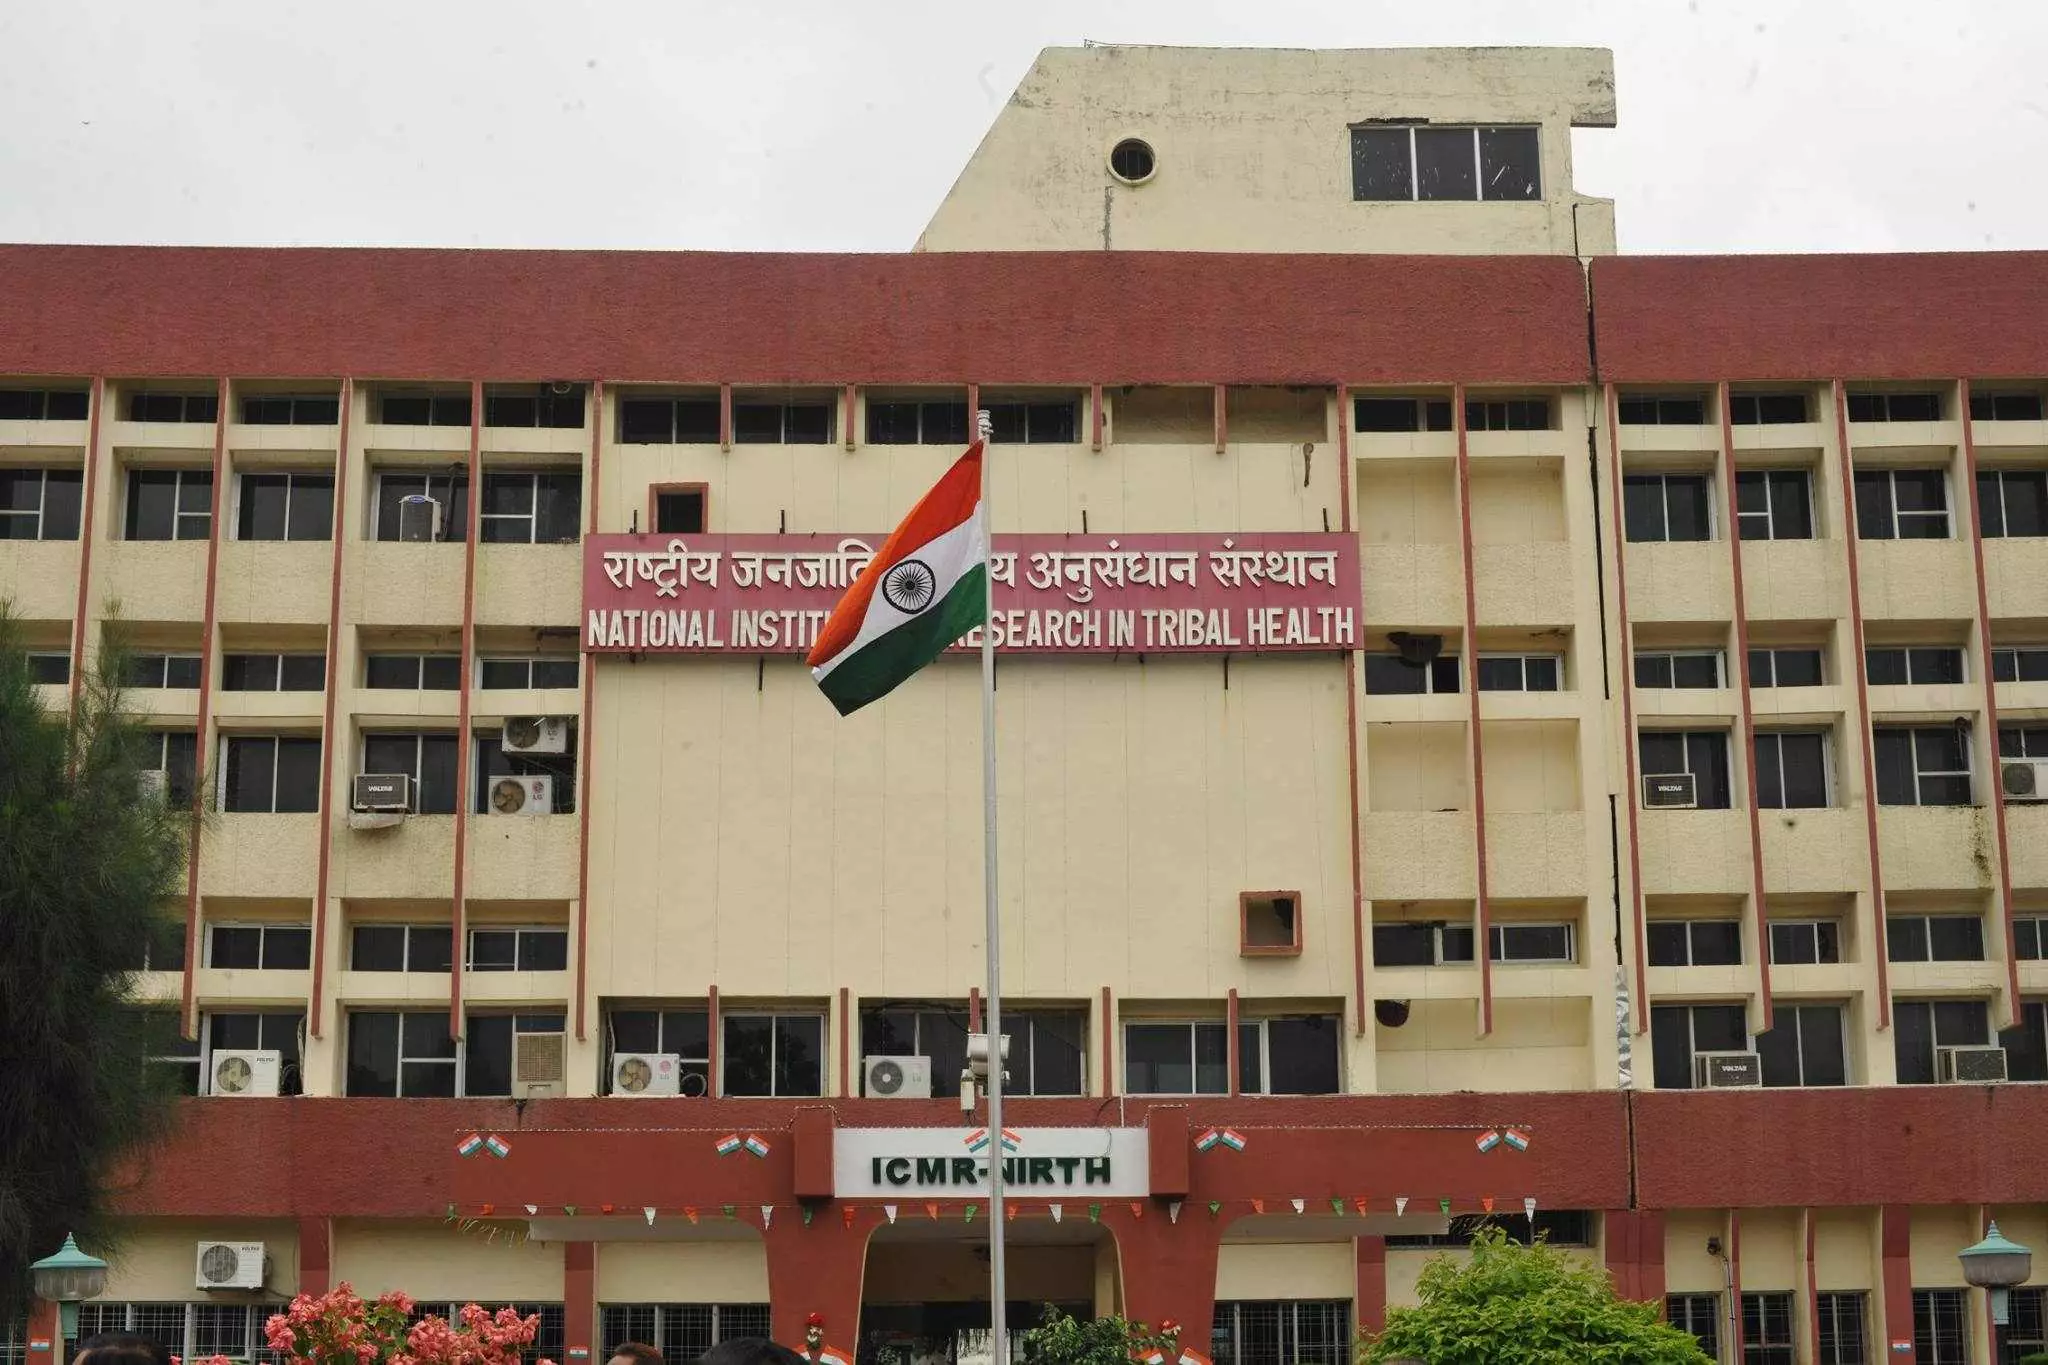 Indian Council of Medical Research (ICMR